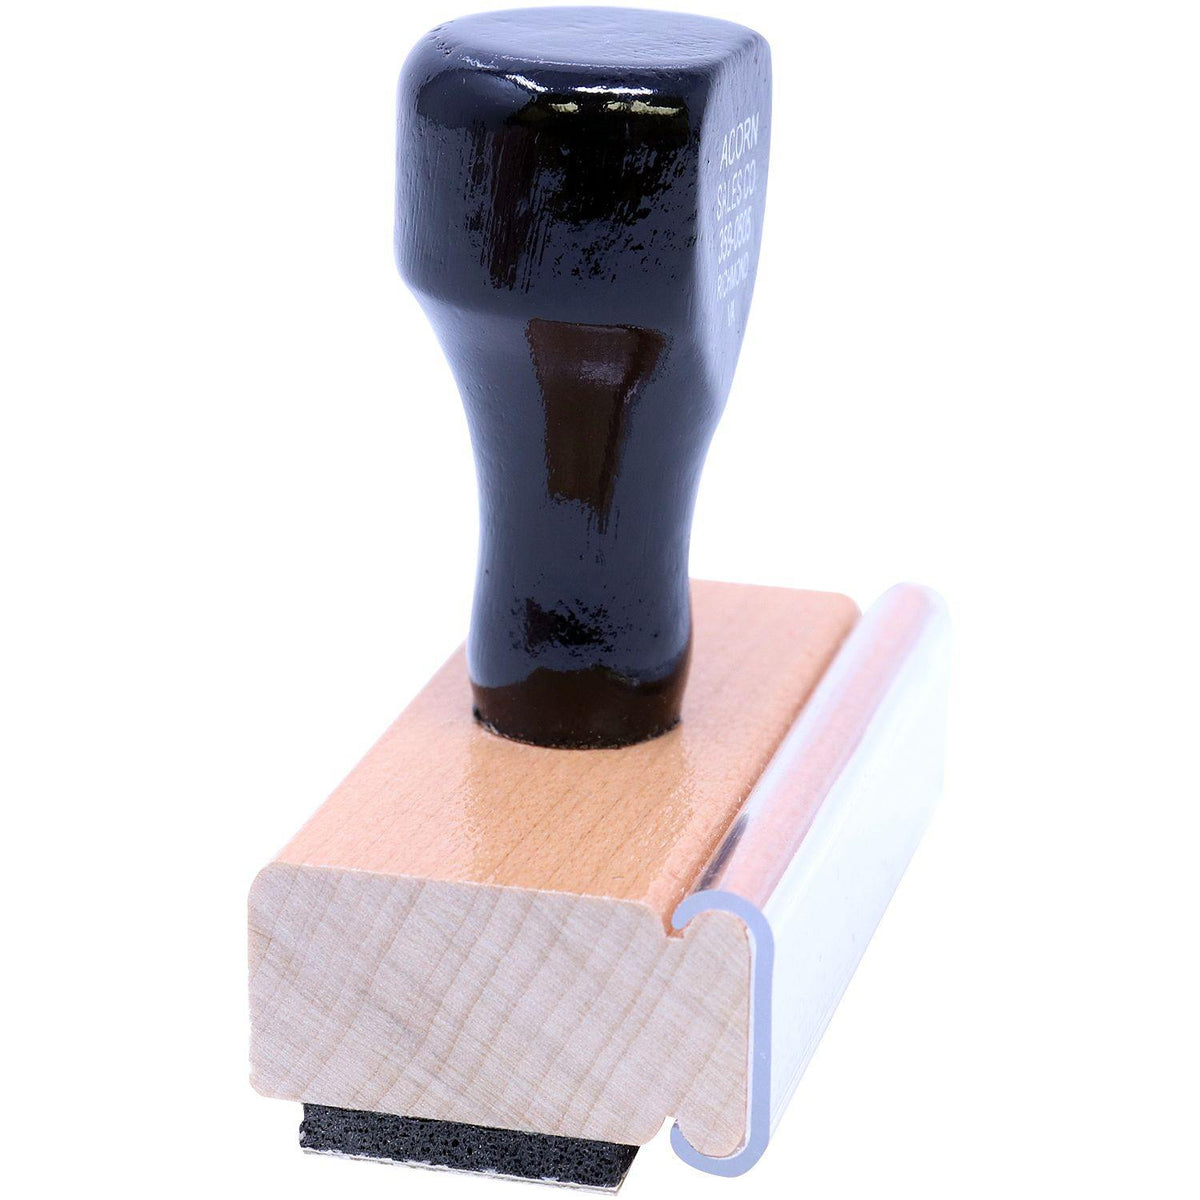 Side View of Large Courtesy Copy Original Filed Electronically Rubber Stamp at an Angle